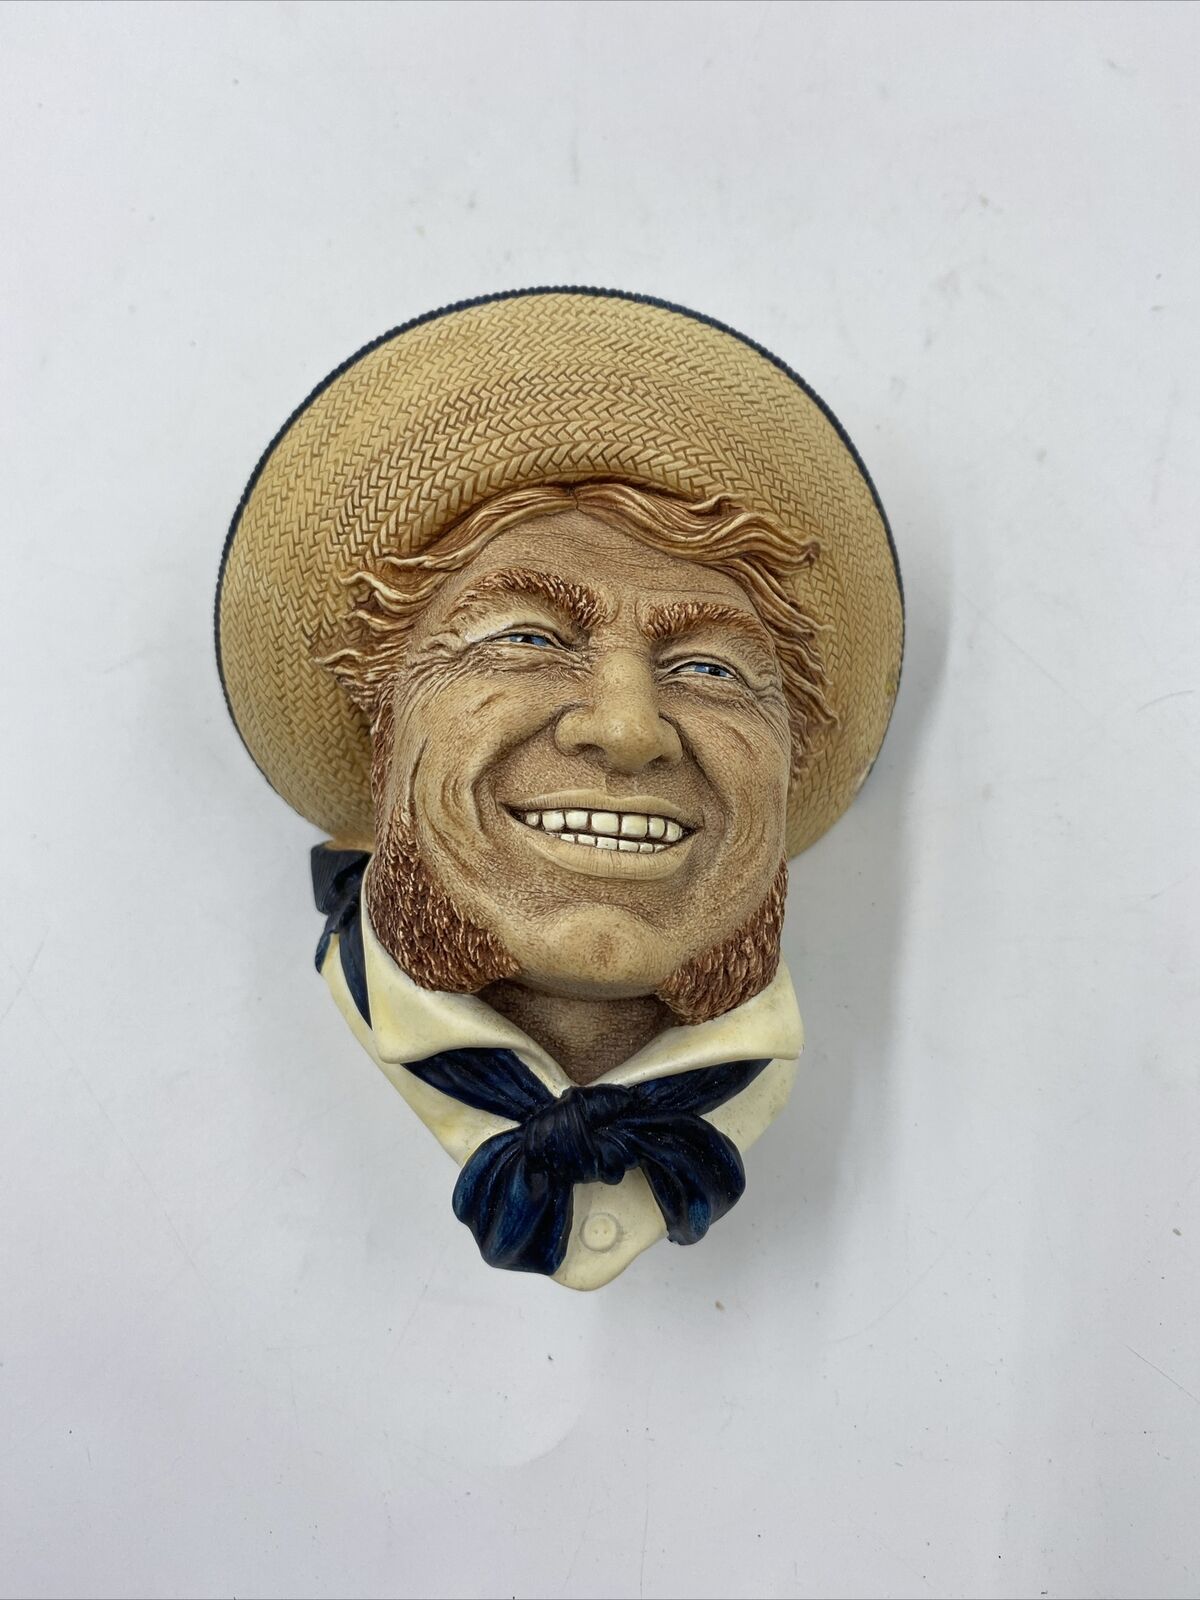 BOSSONS CONGLETON CHAULKWARE HEAD “JOLLY TAR” 1988 Nice (see Pictures)